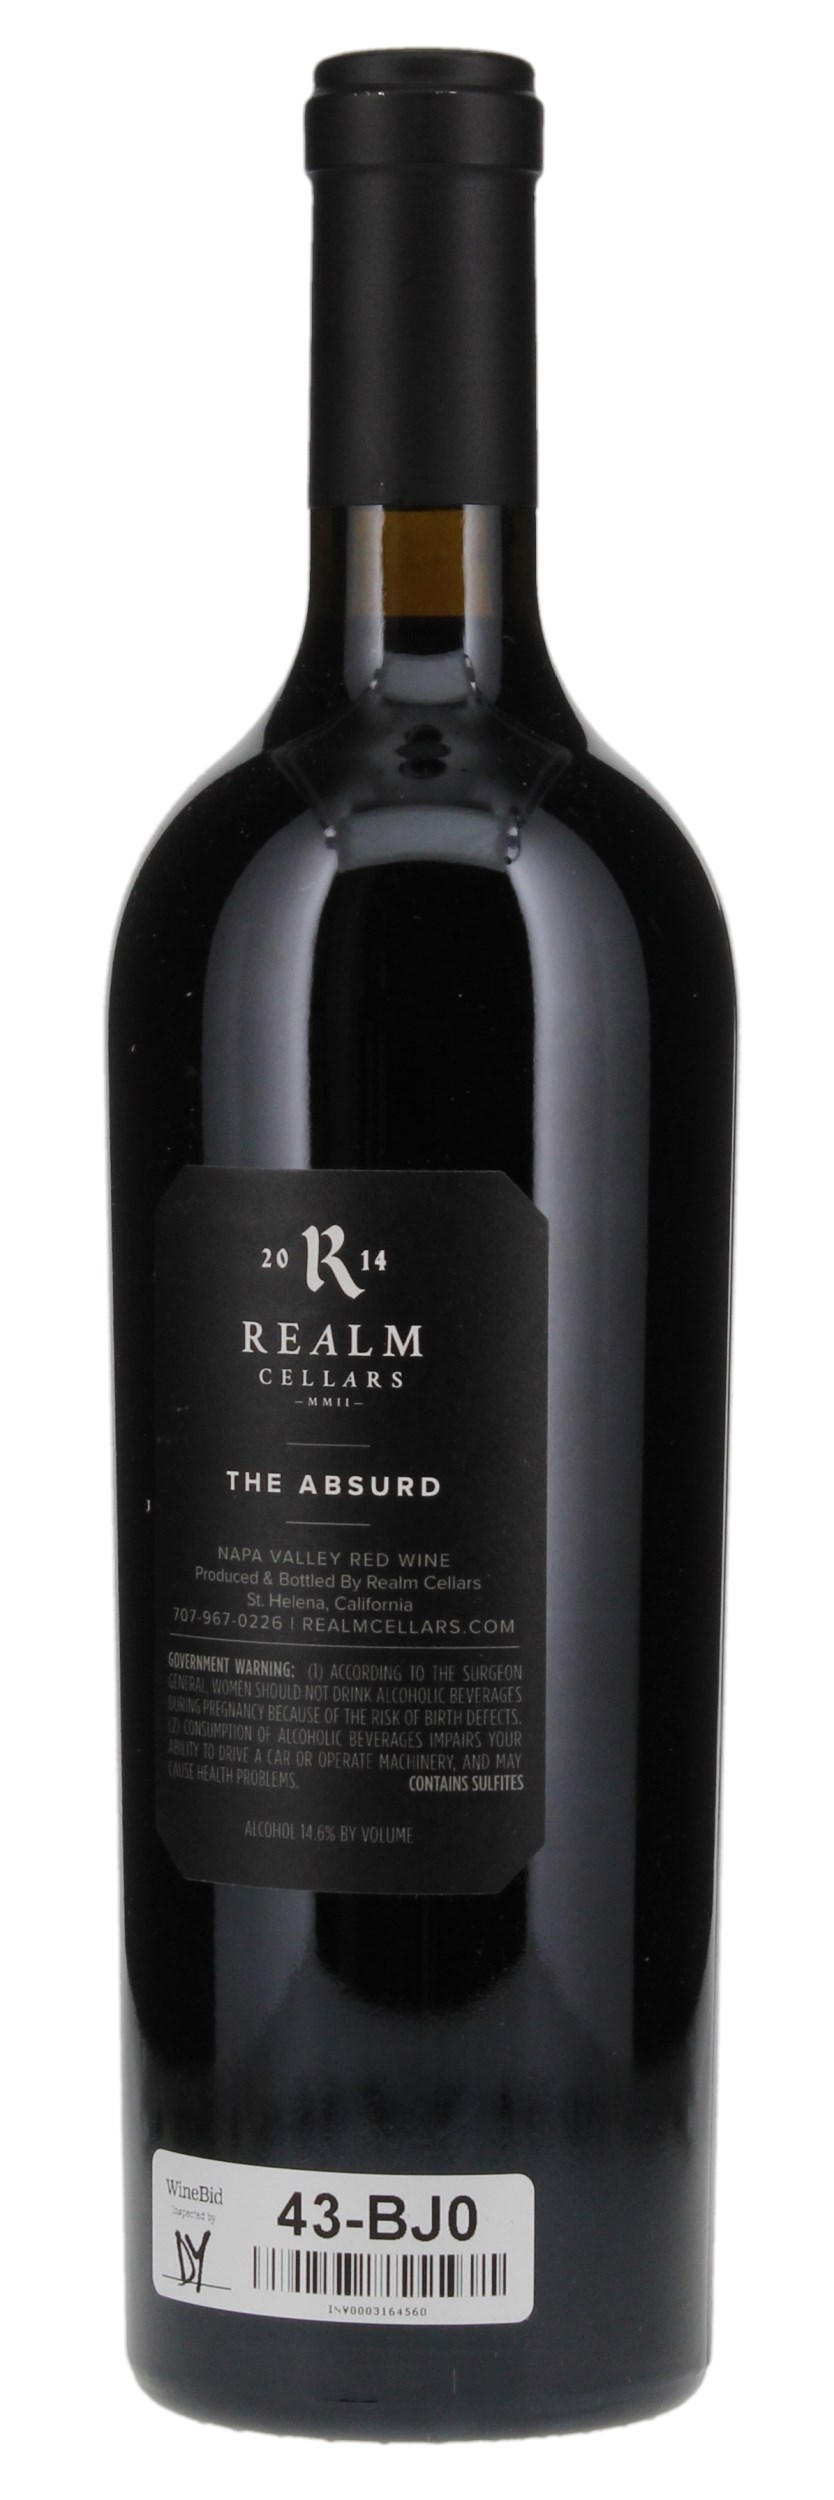 2014 Realm The Absurd, 750ml